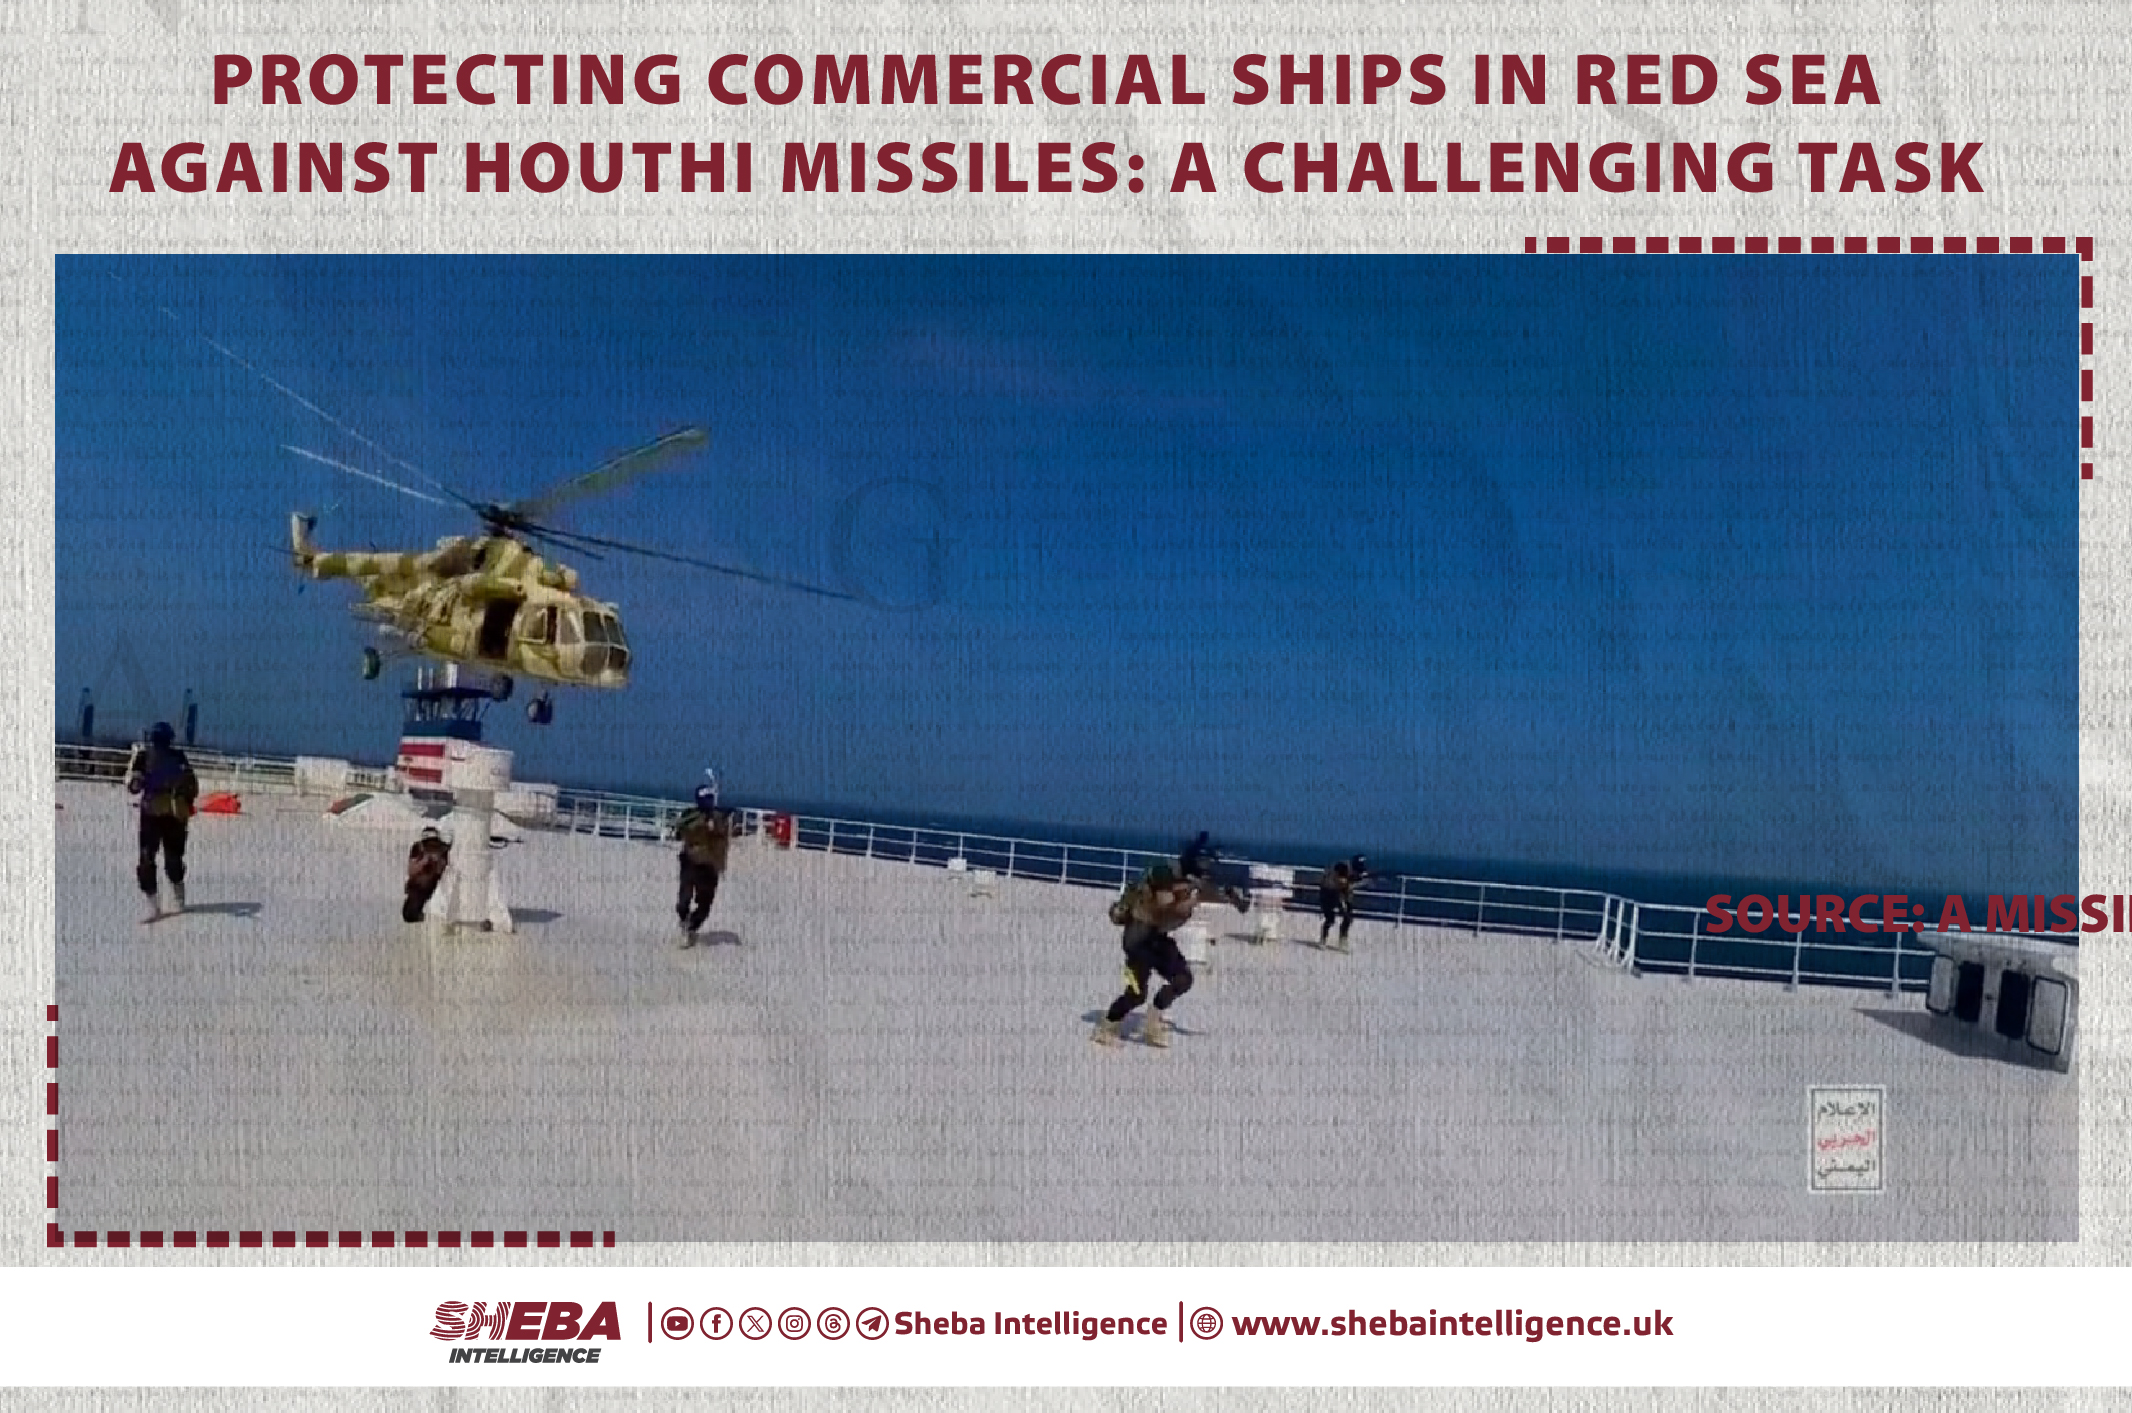 Protecting Commercial Ships in Red Sea Against Houthi Missiles: A Challenging Task